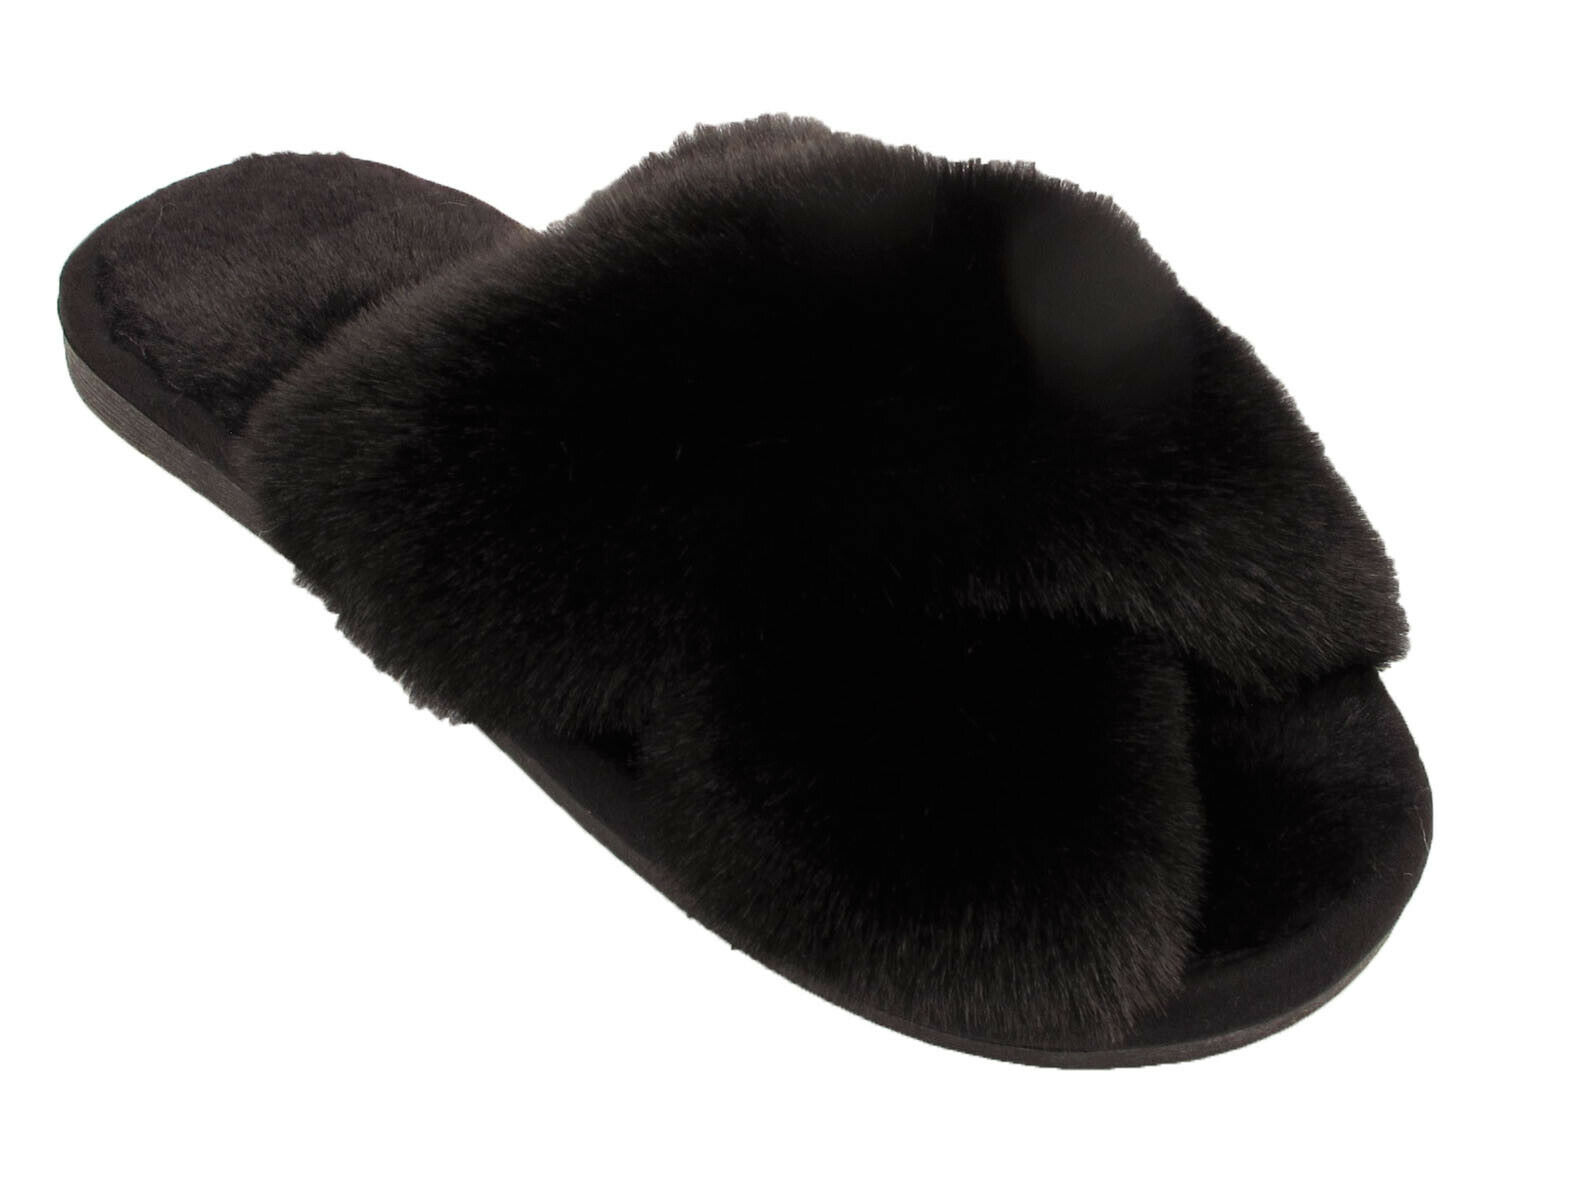 Size 5-6 Black Ladies Furry Slippers Women Fluffy Sliders Crossover Open Toe Faux Fur Mules